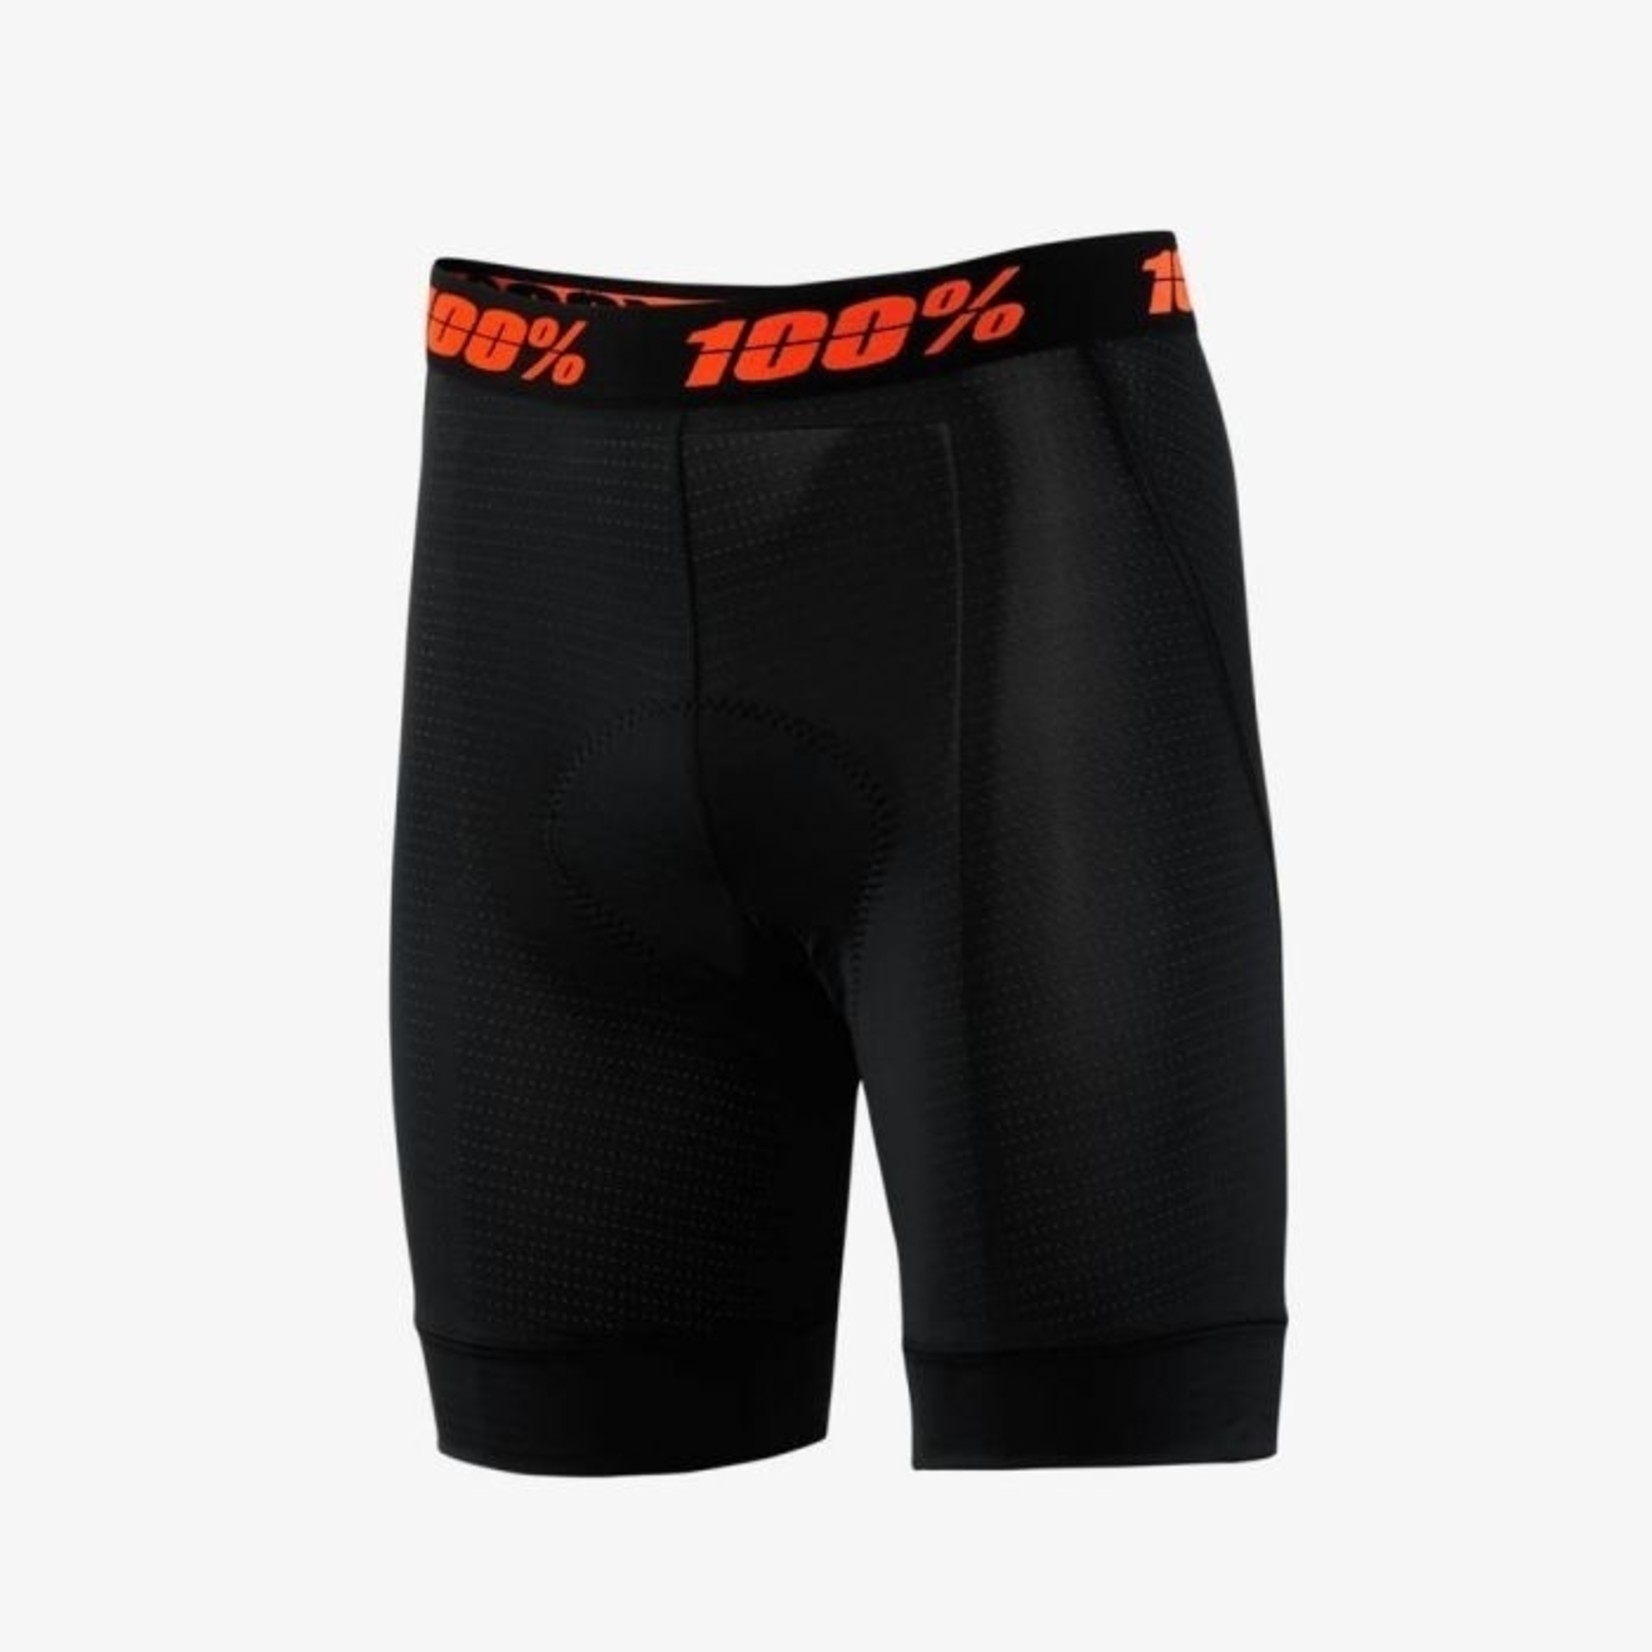 100% Ridecamp Bike Gear Crux Youth Liner Short - Black Polyester